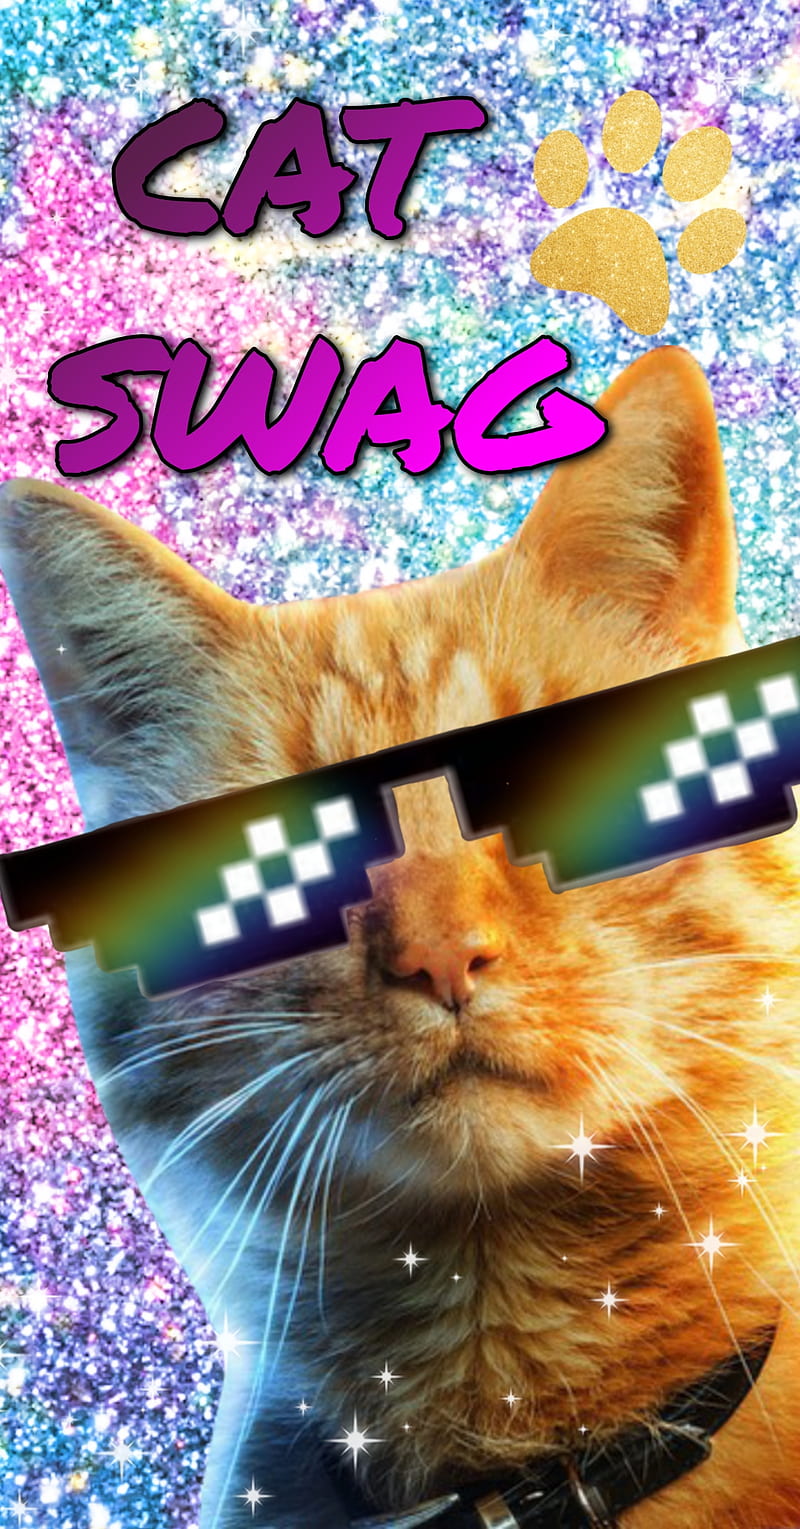 Cat, cat wearing shades, animals, swag, catwearingshades, cute, funny, kitty, swag cat, cat swag, HD phone wallpaper